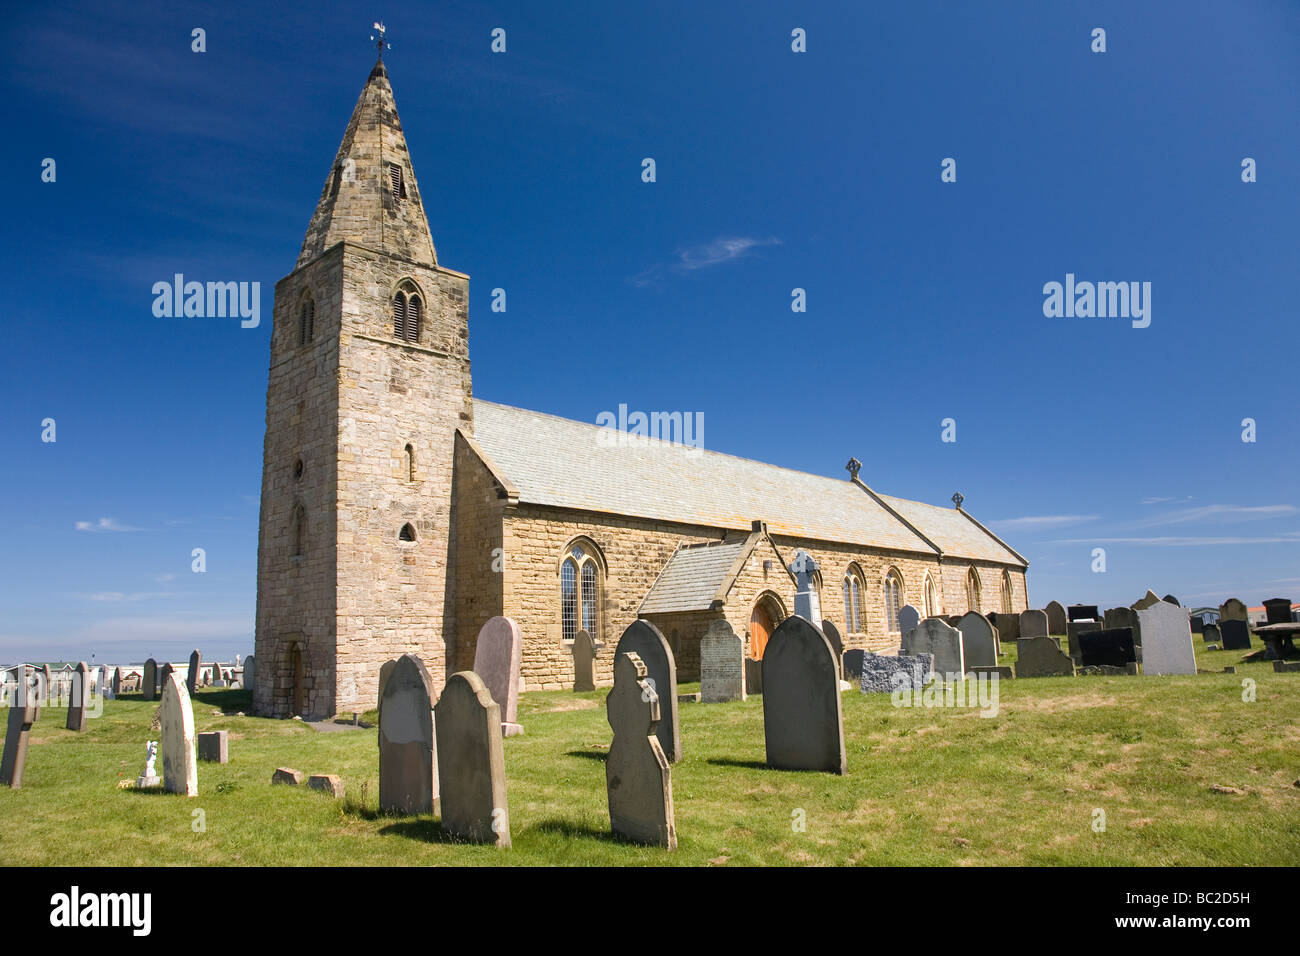 St Bartholomew's Church at Newbiggin-by-the-Sea in Northumberland. Graves stand in the church yard. Stock Photo